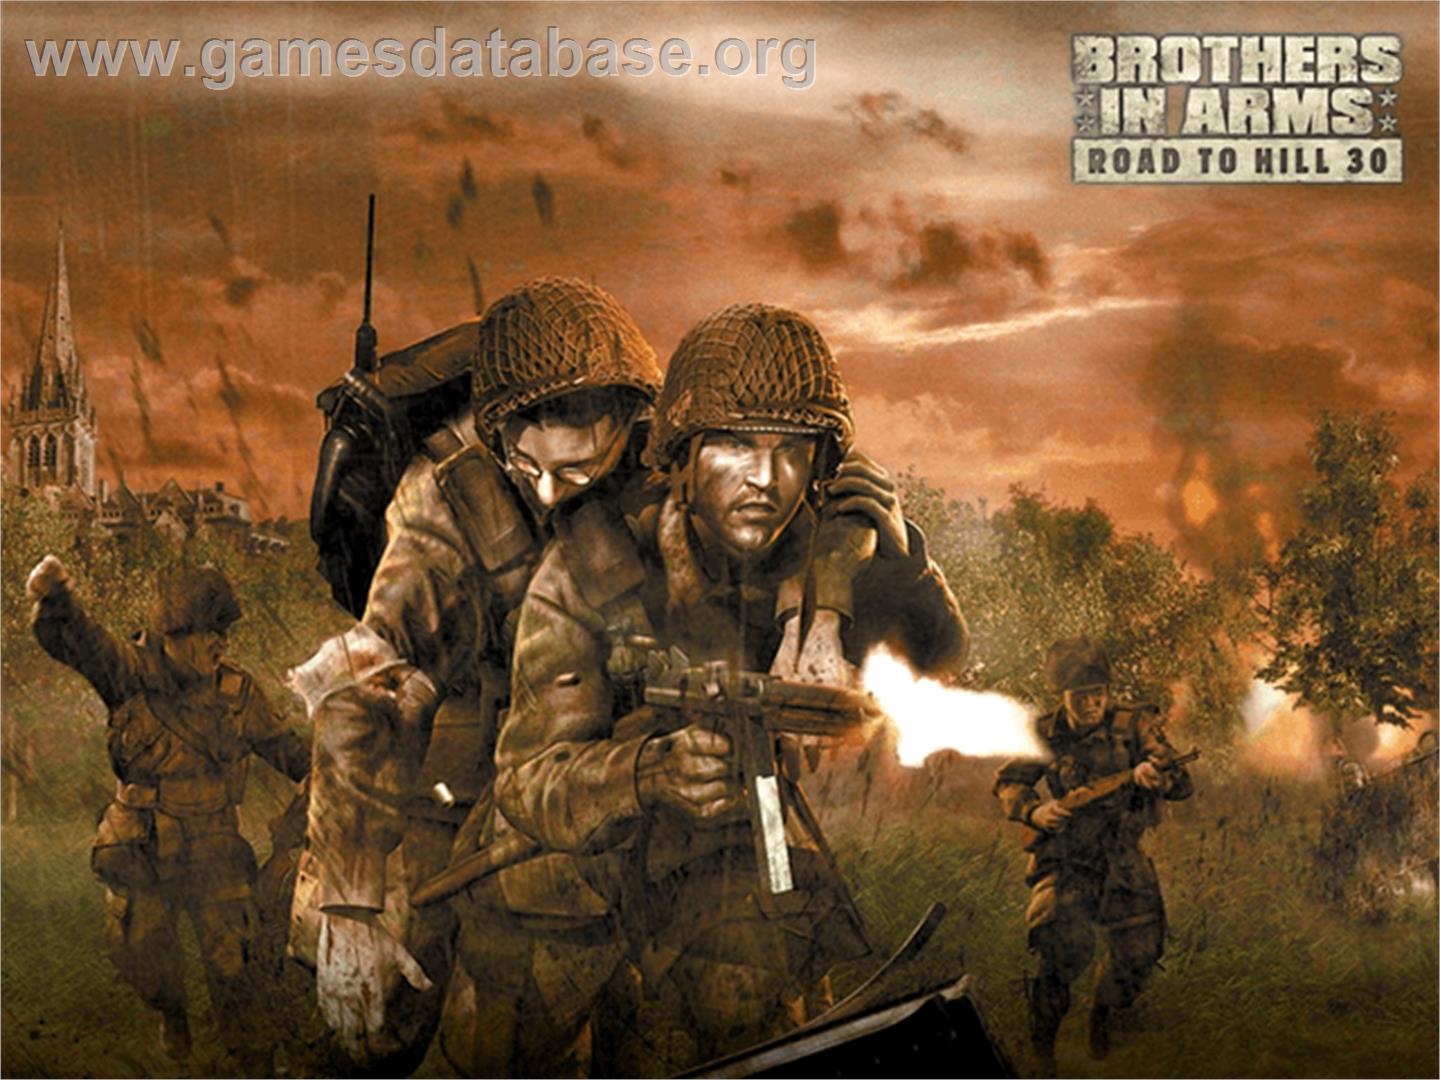 Brothers in Arms: Road to Hill 30 - Microsoft Xbox - Artwork - Title Screen